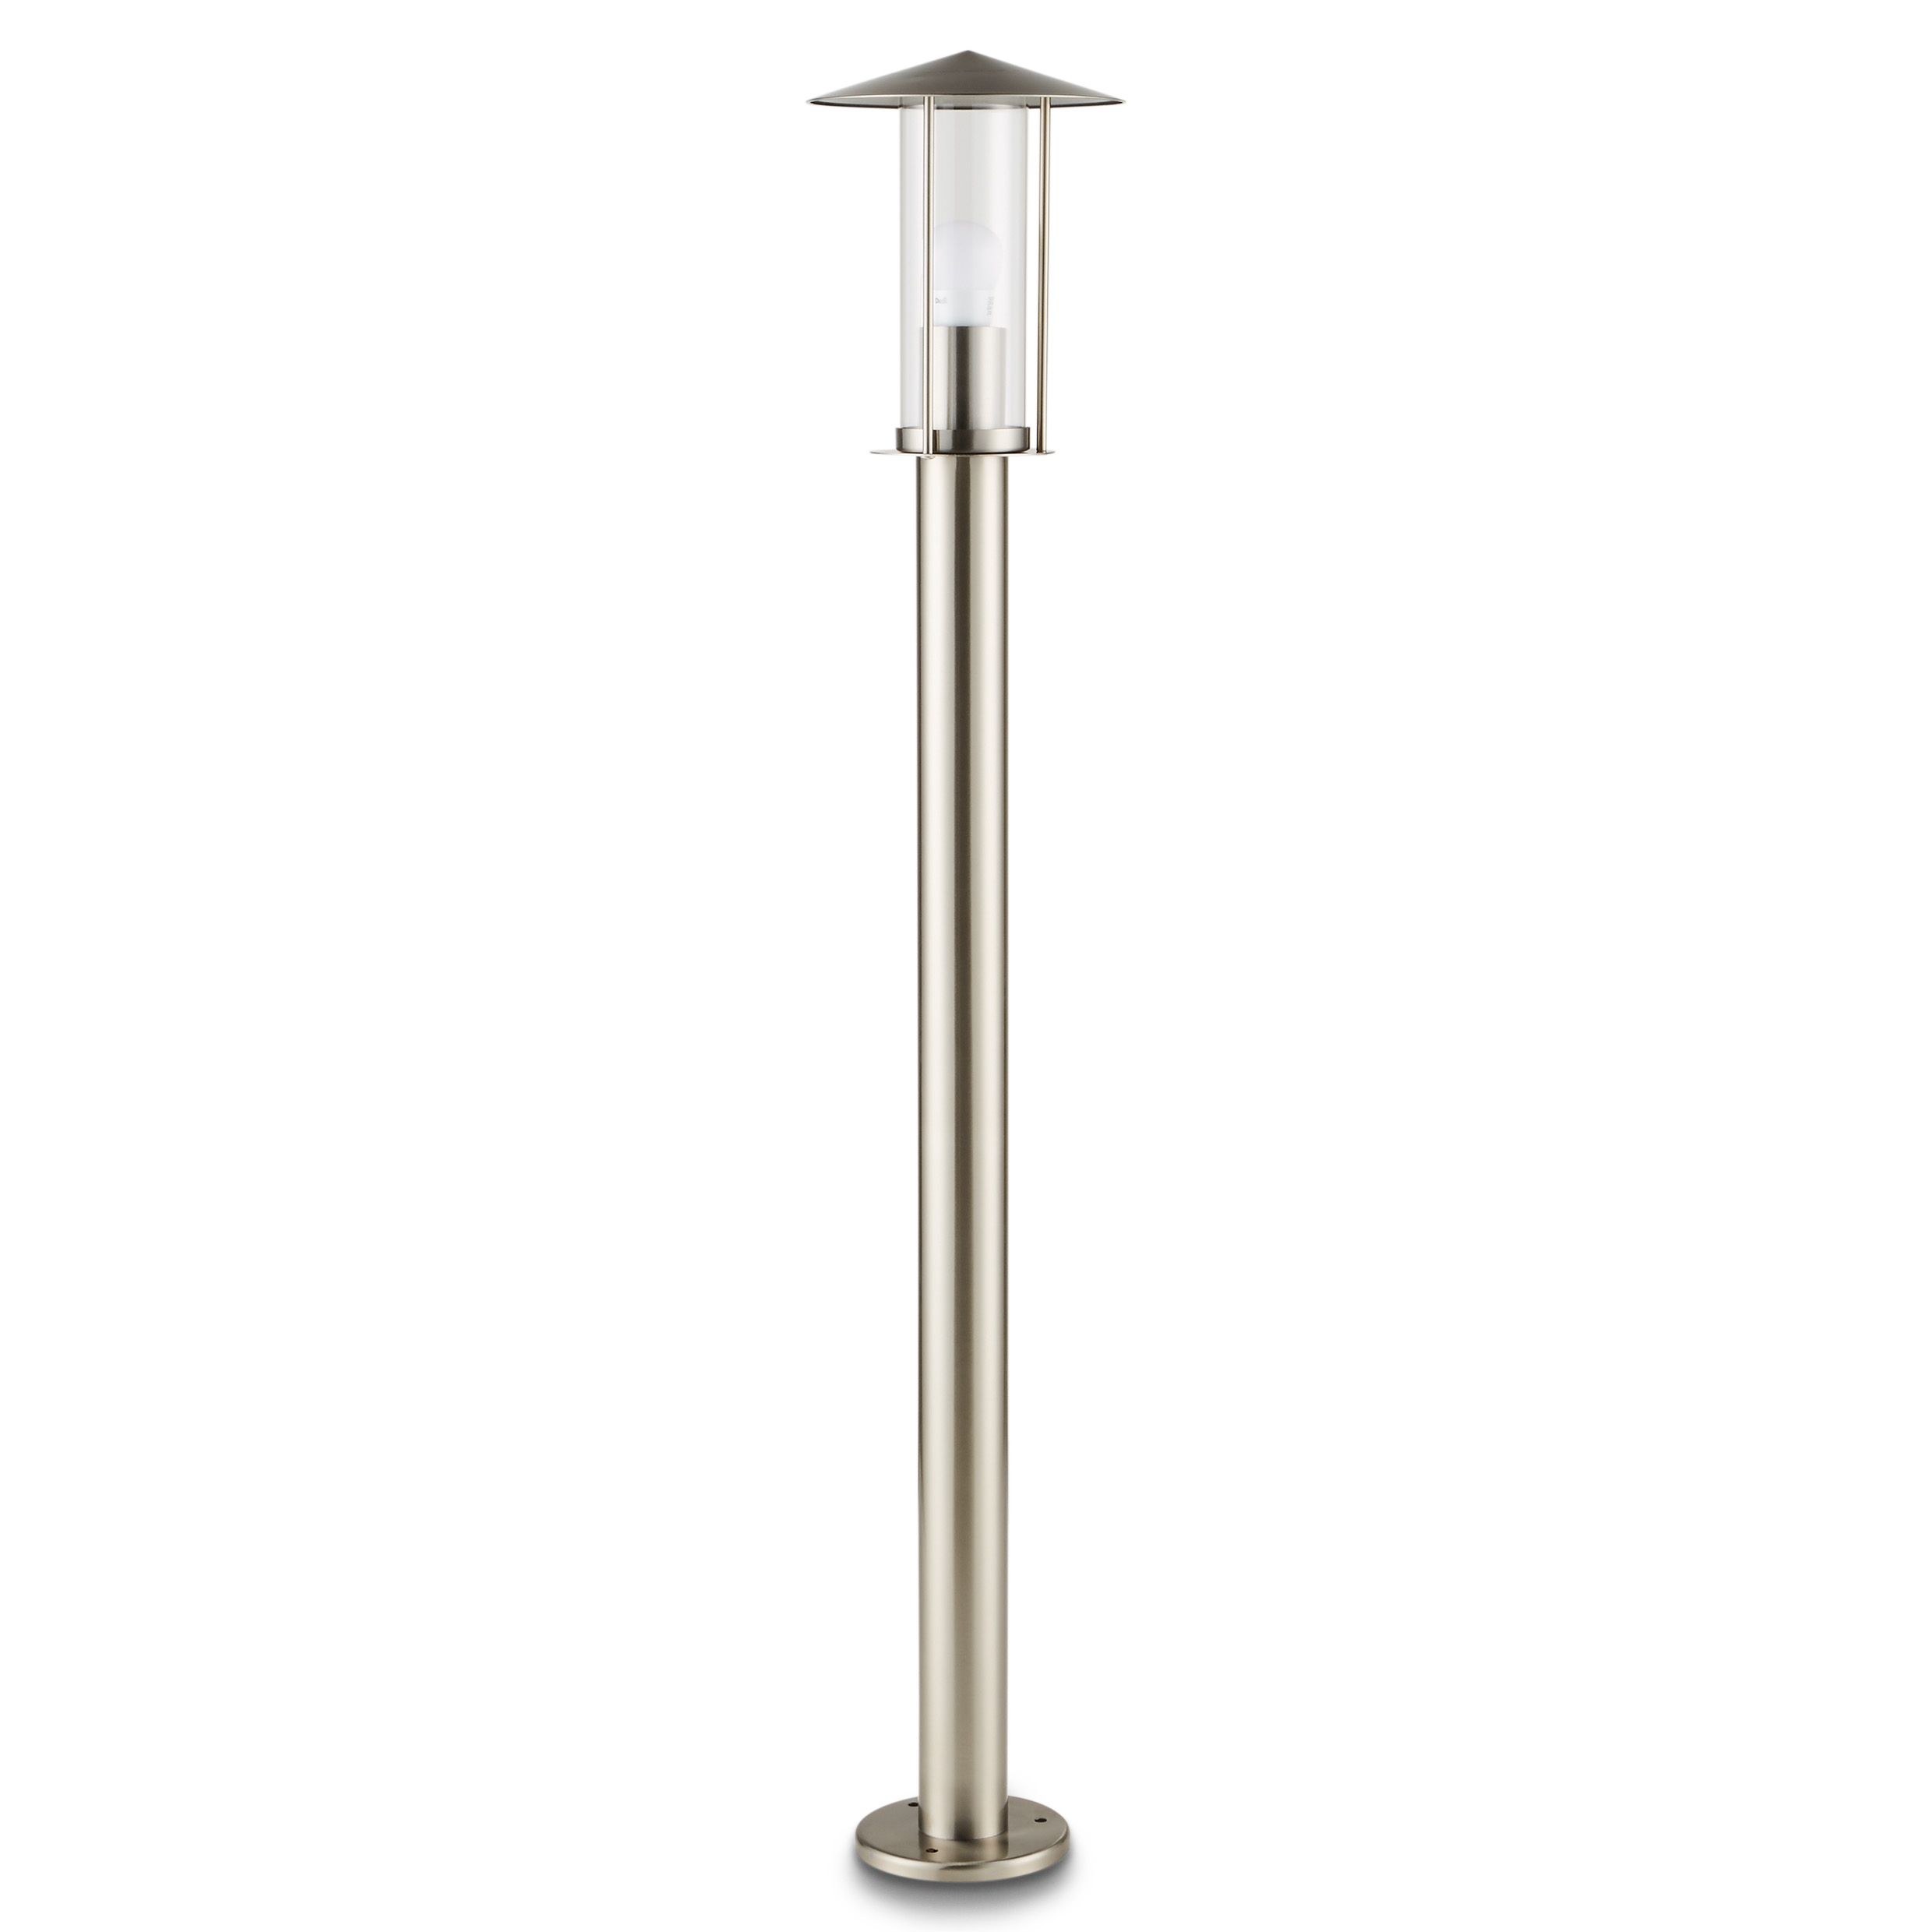 Blooma Chignik Brushed Silver Effect Mains Powered Halogen Lamp